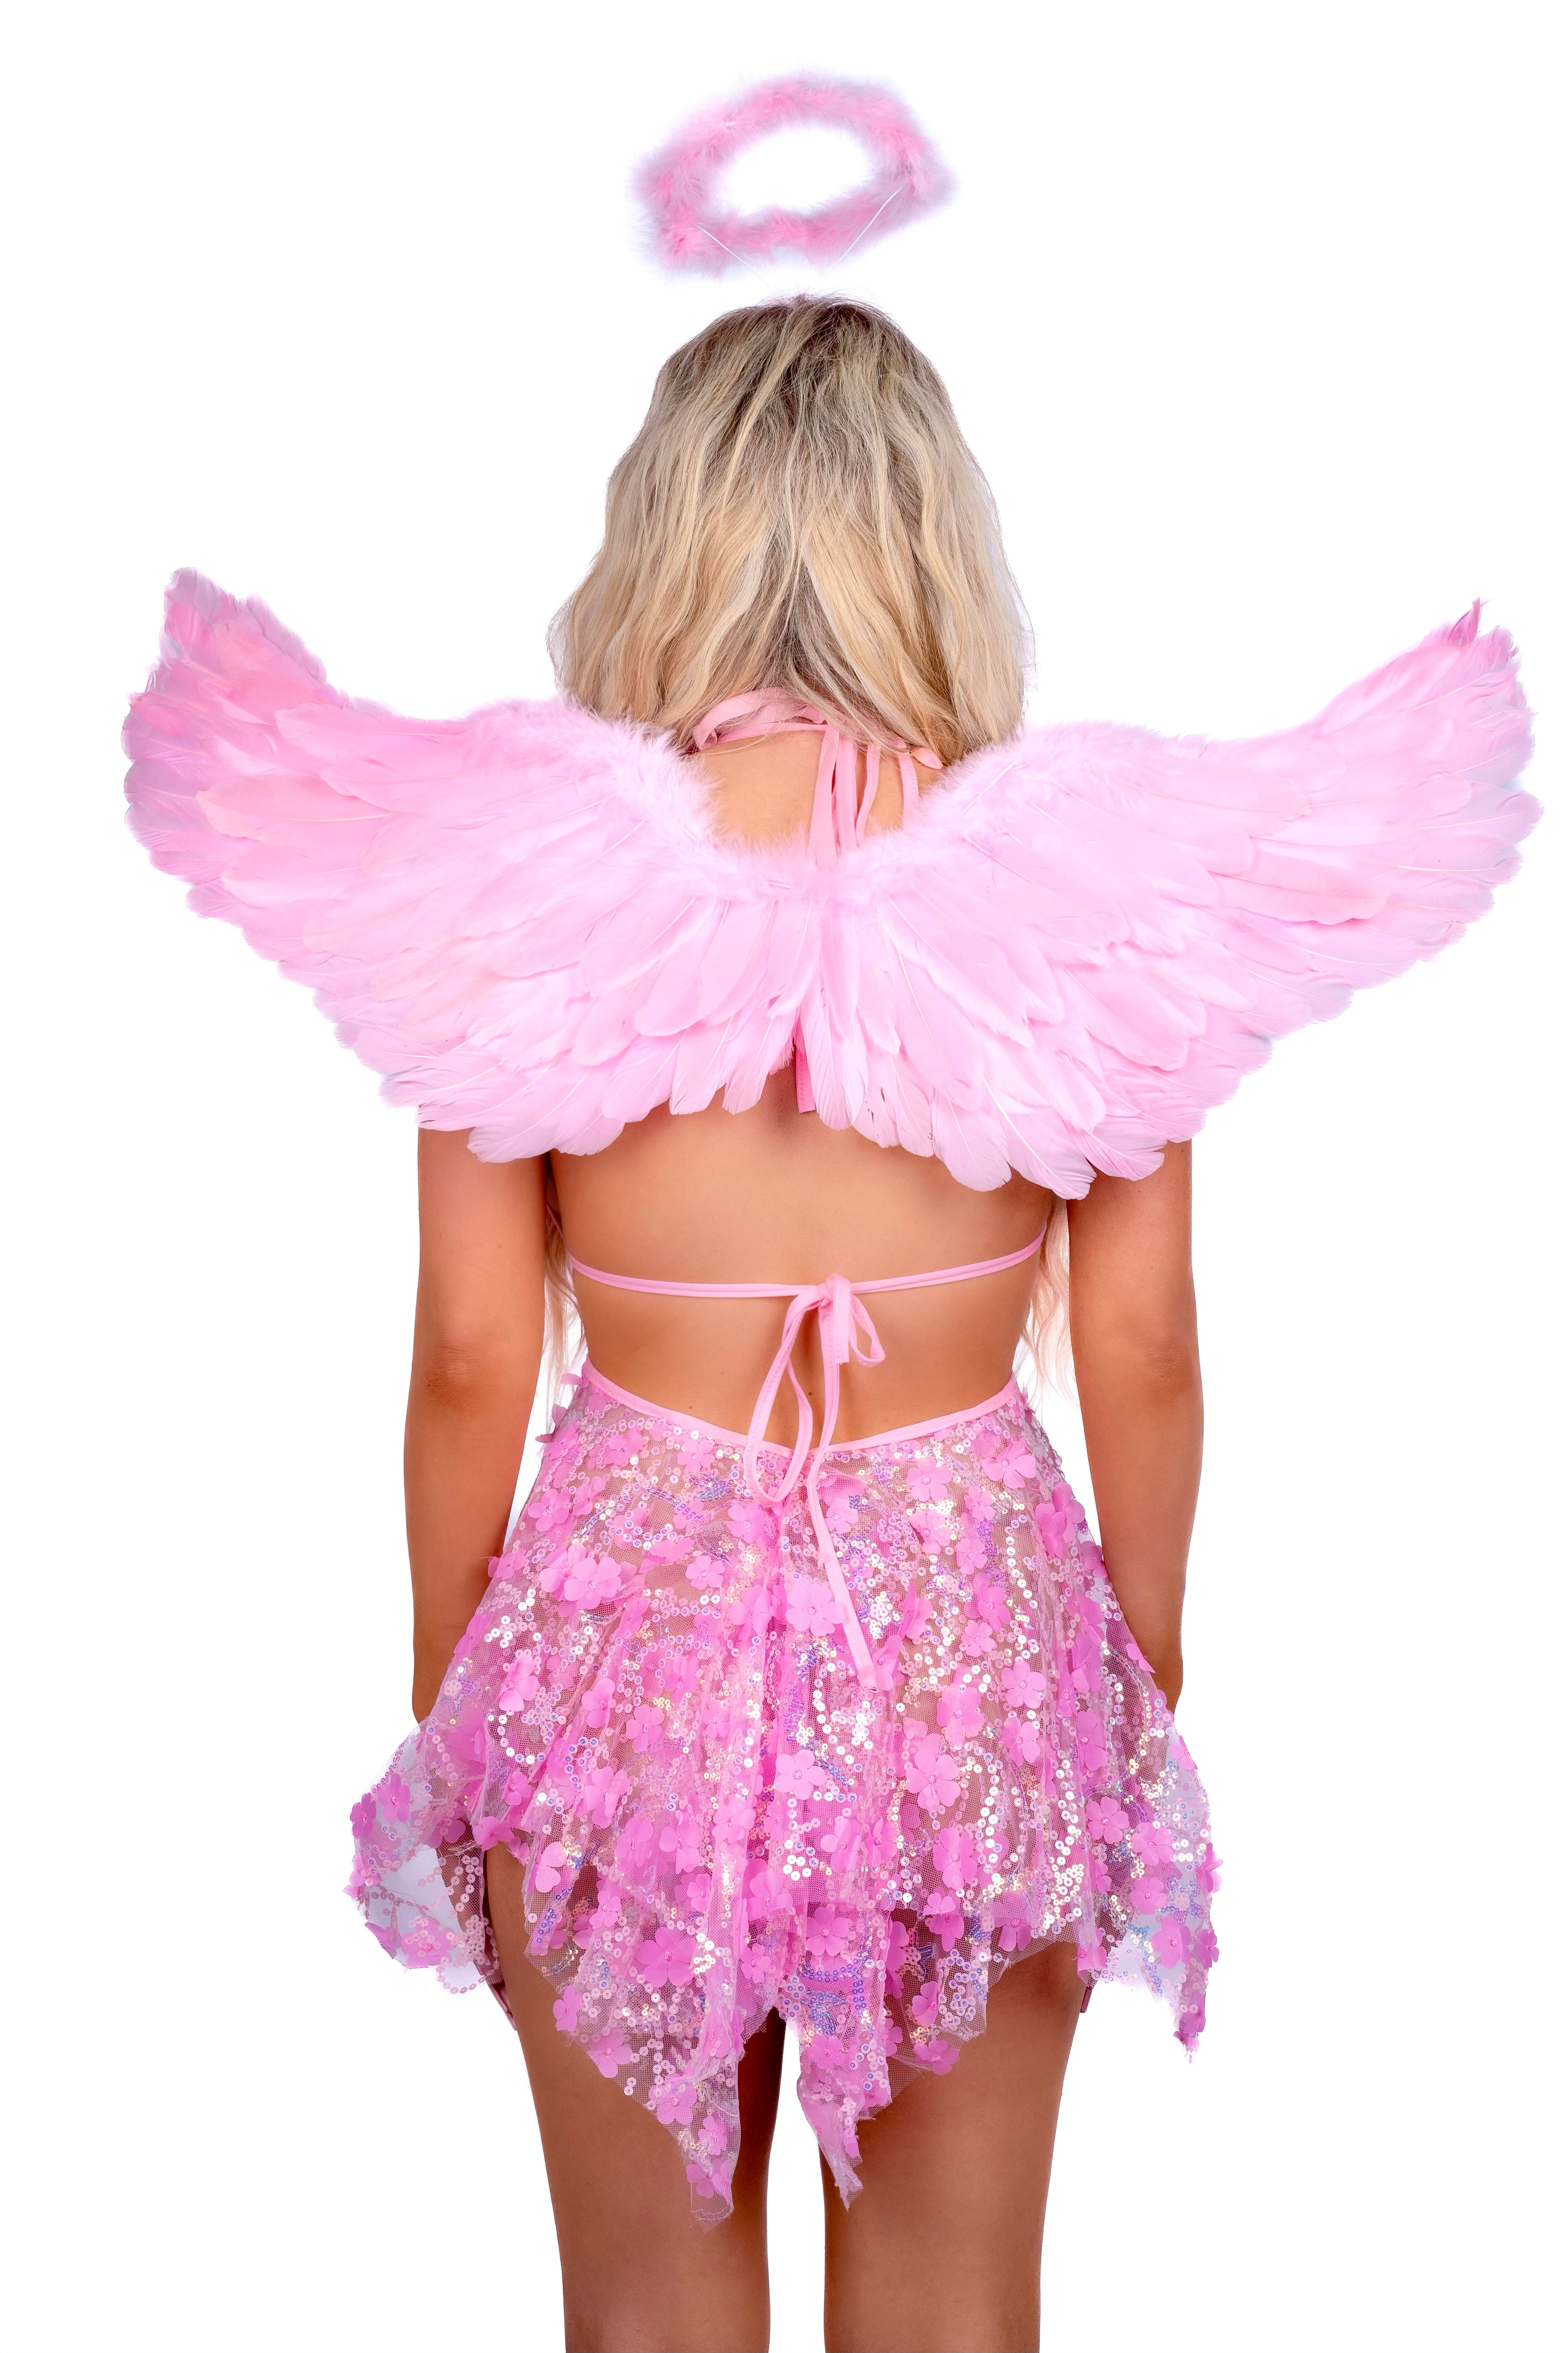 FULL OUTFIT- Pink Blossom Angel (4 pcs)